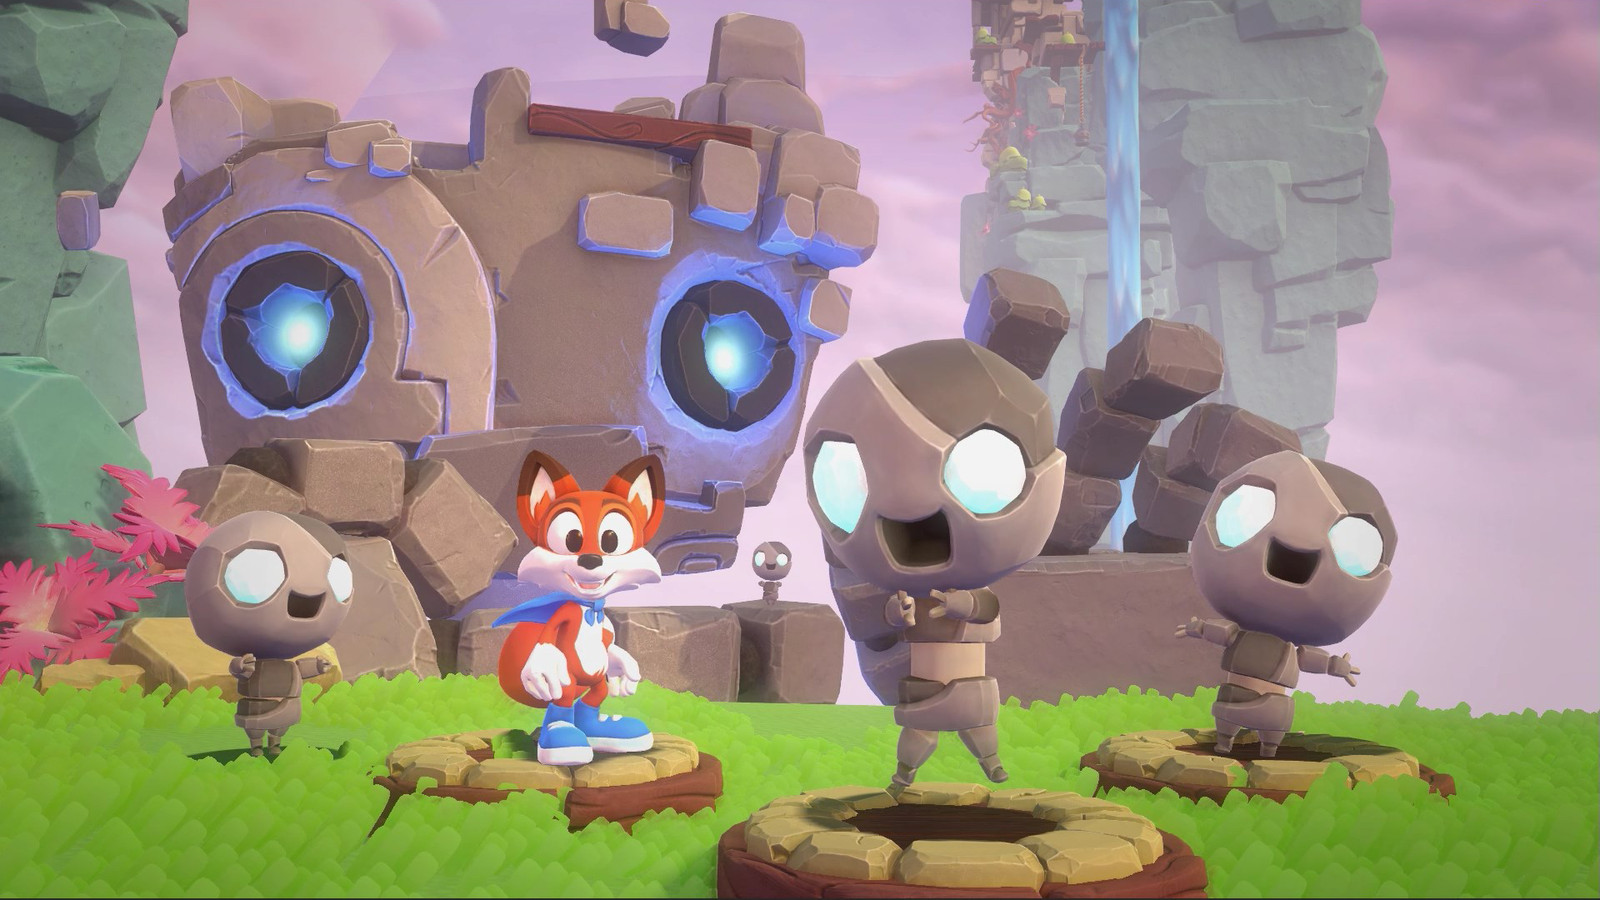 Super Lucky’s Tale